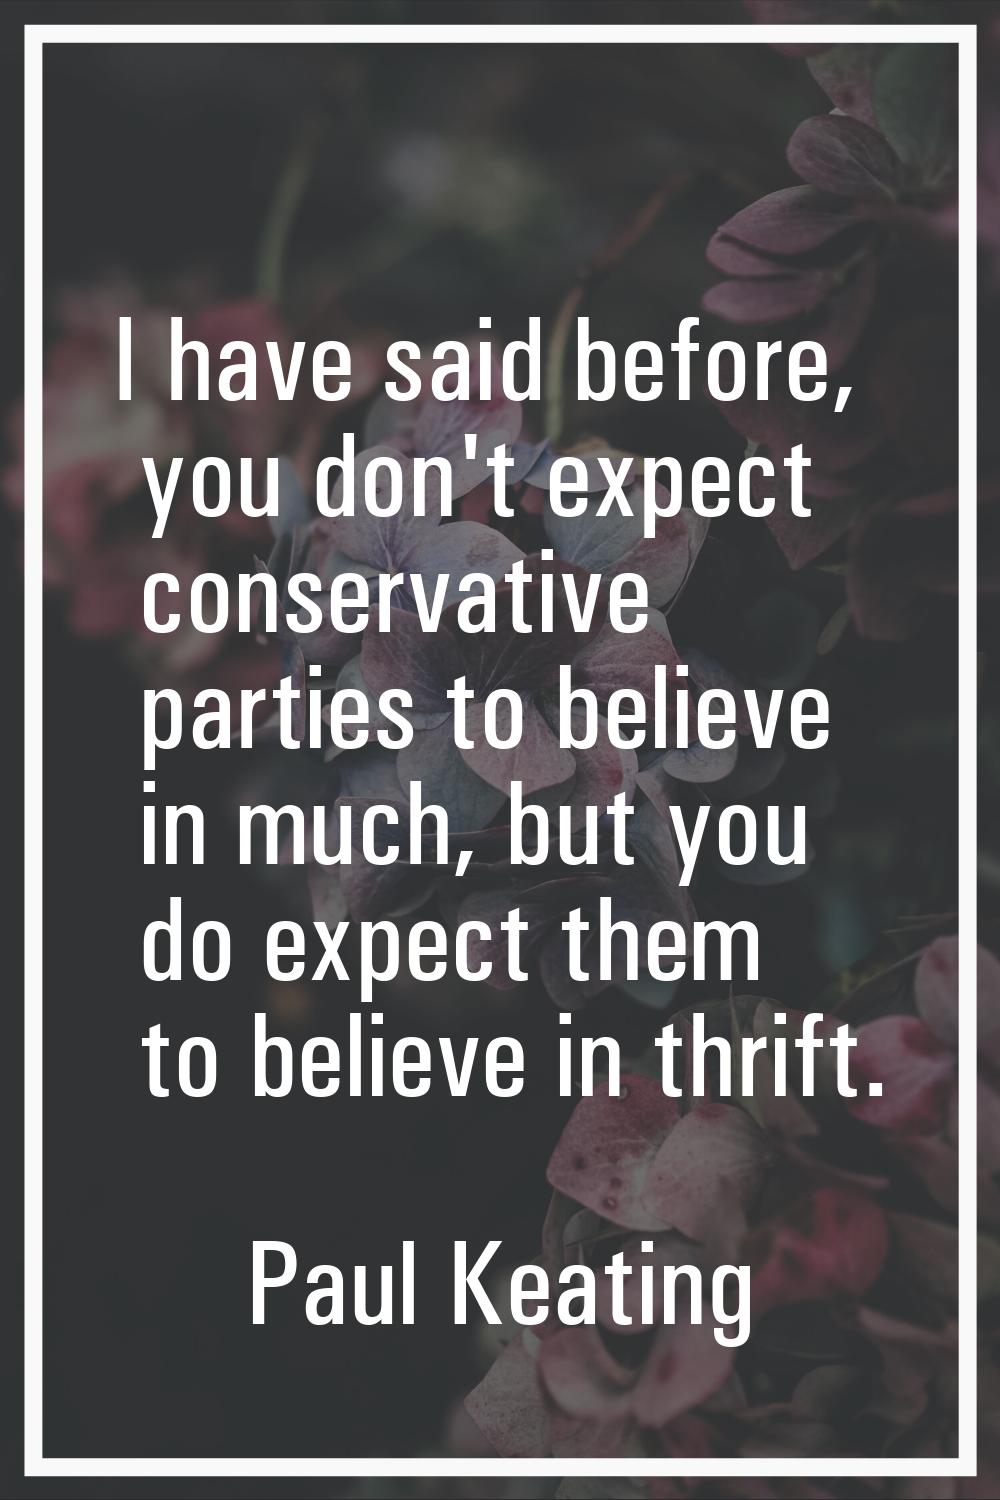 I have said before, you don't expect conservative parties to believe in much, but you do expect the